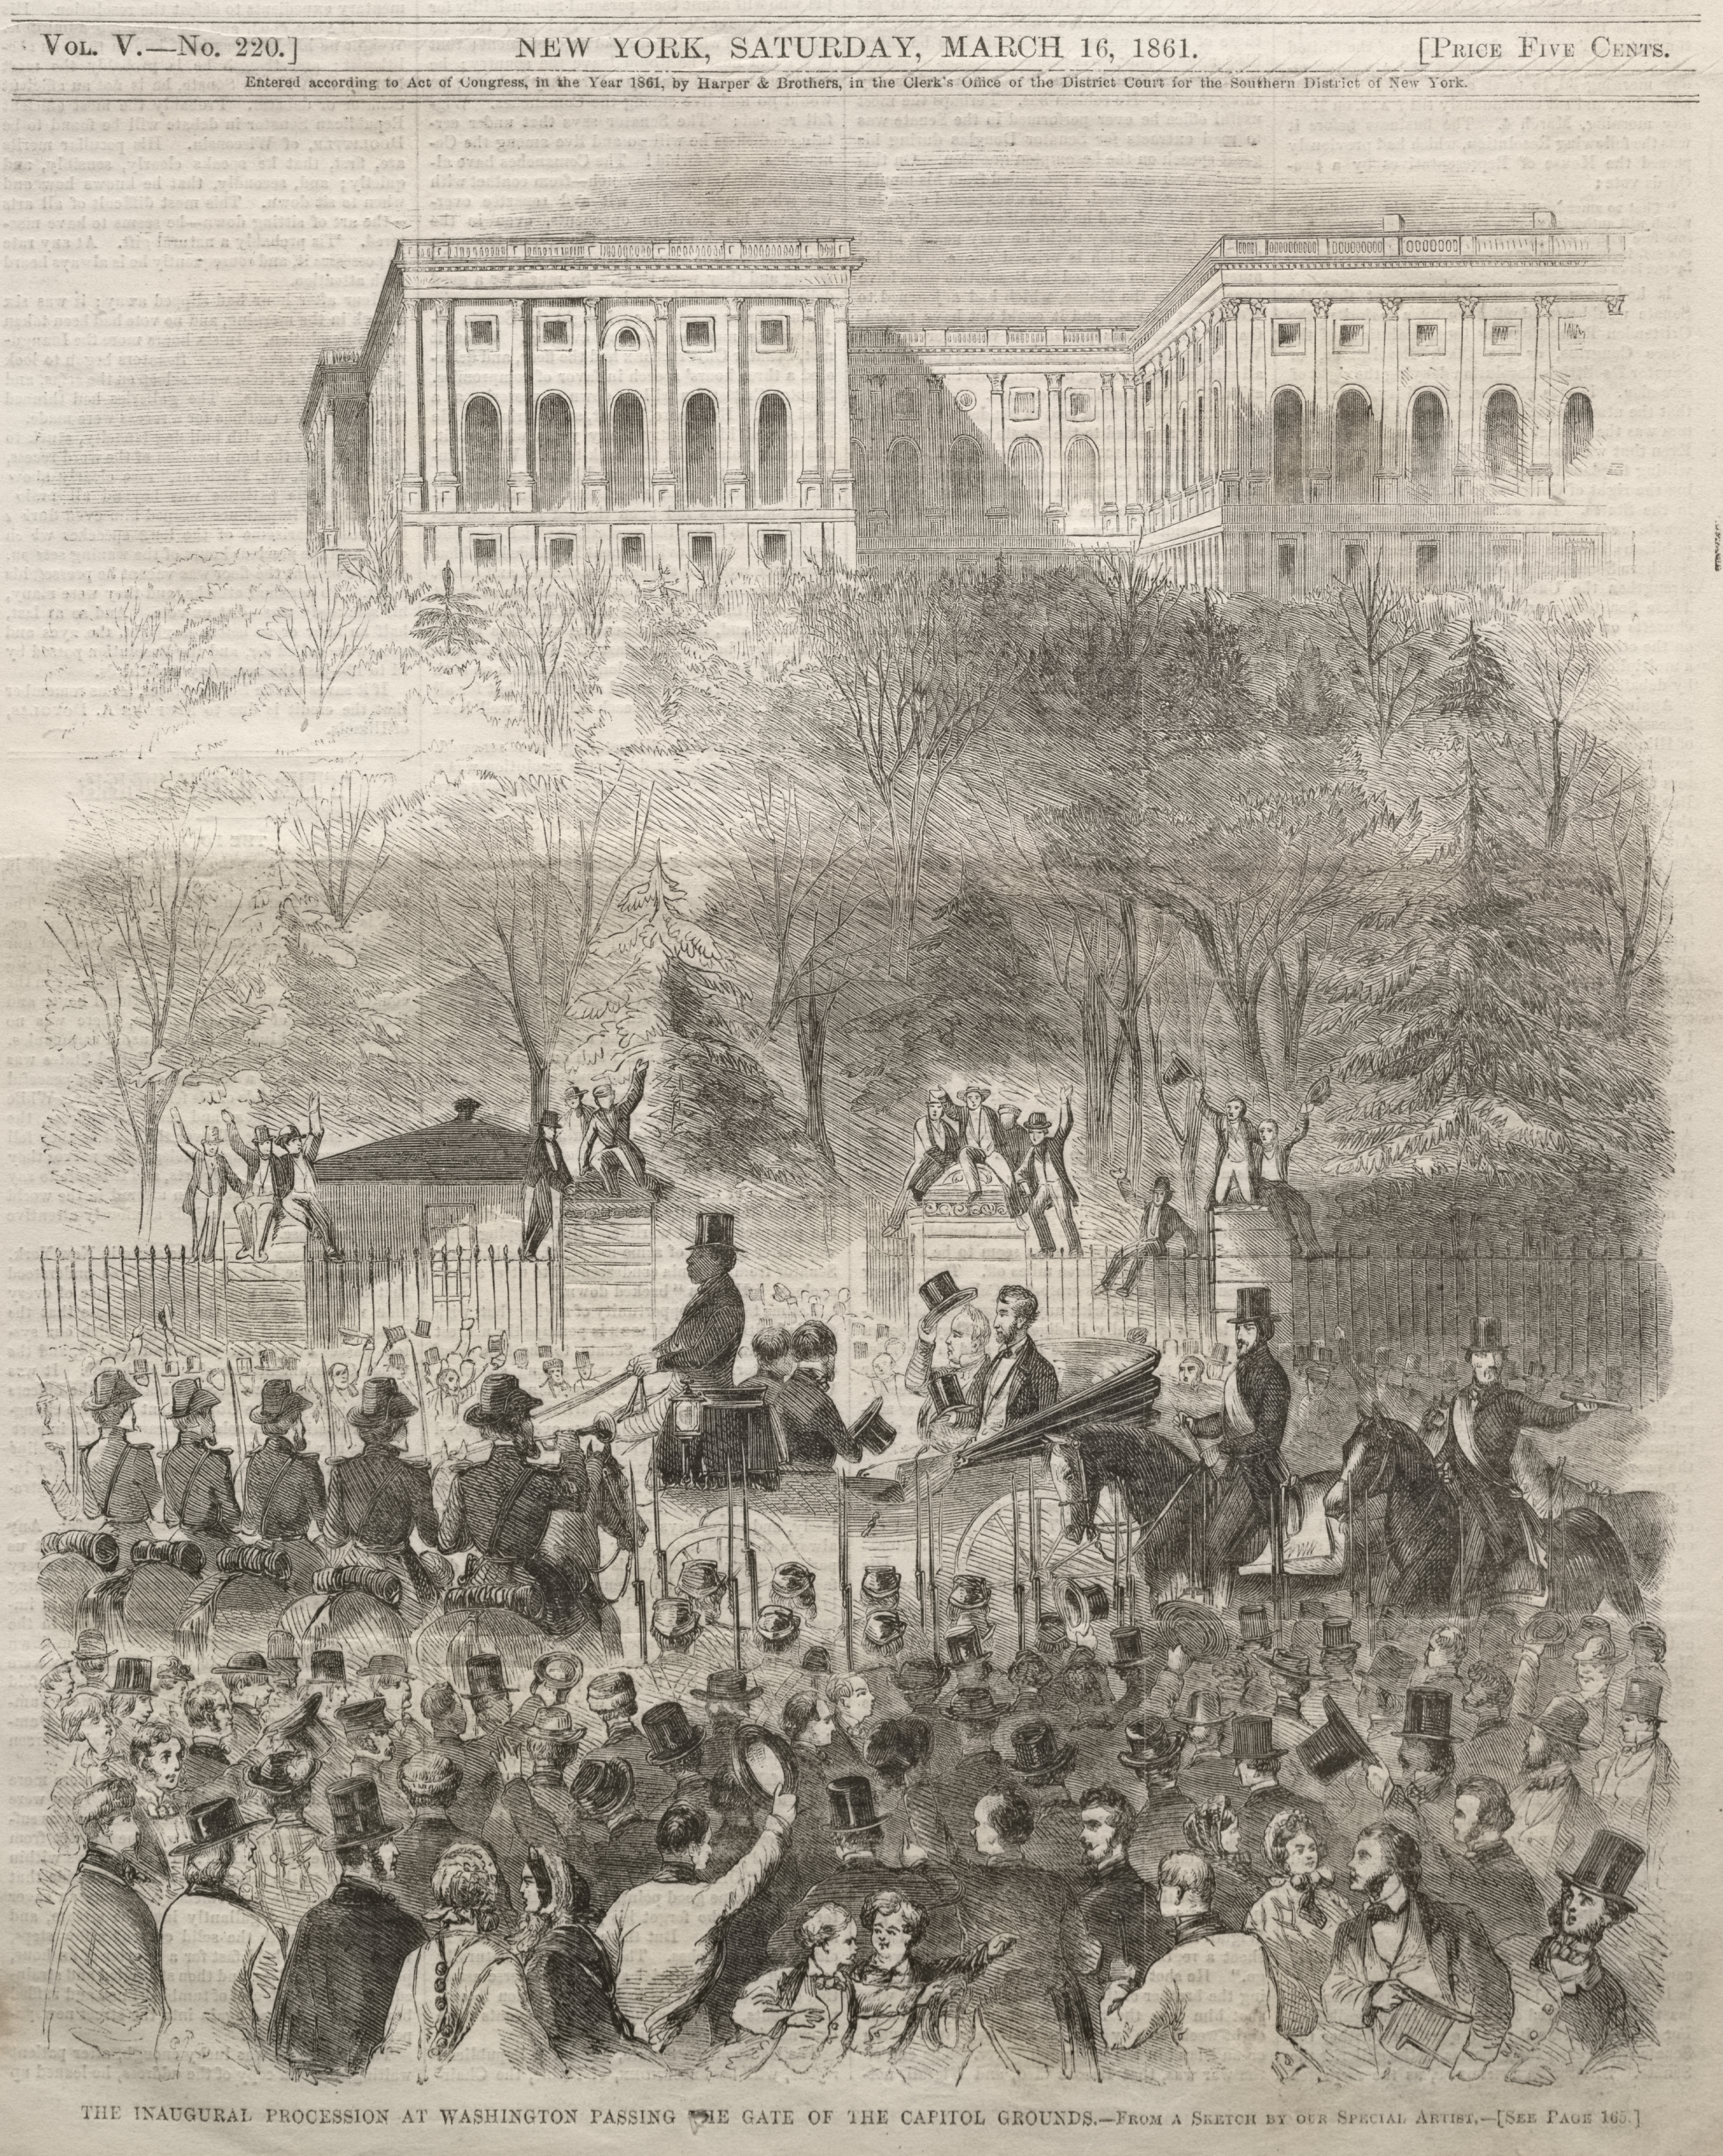 The Inaugural Procession at Washington Passing the Gate of the Capital Grounds